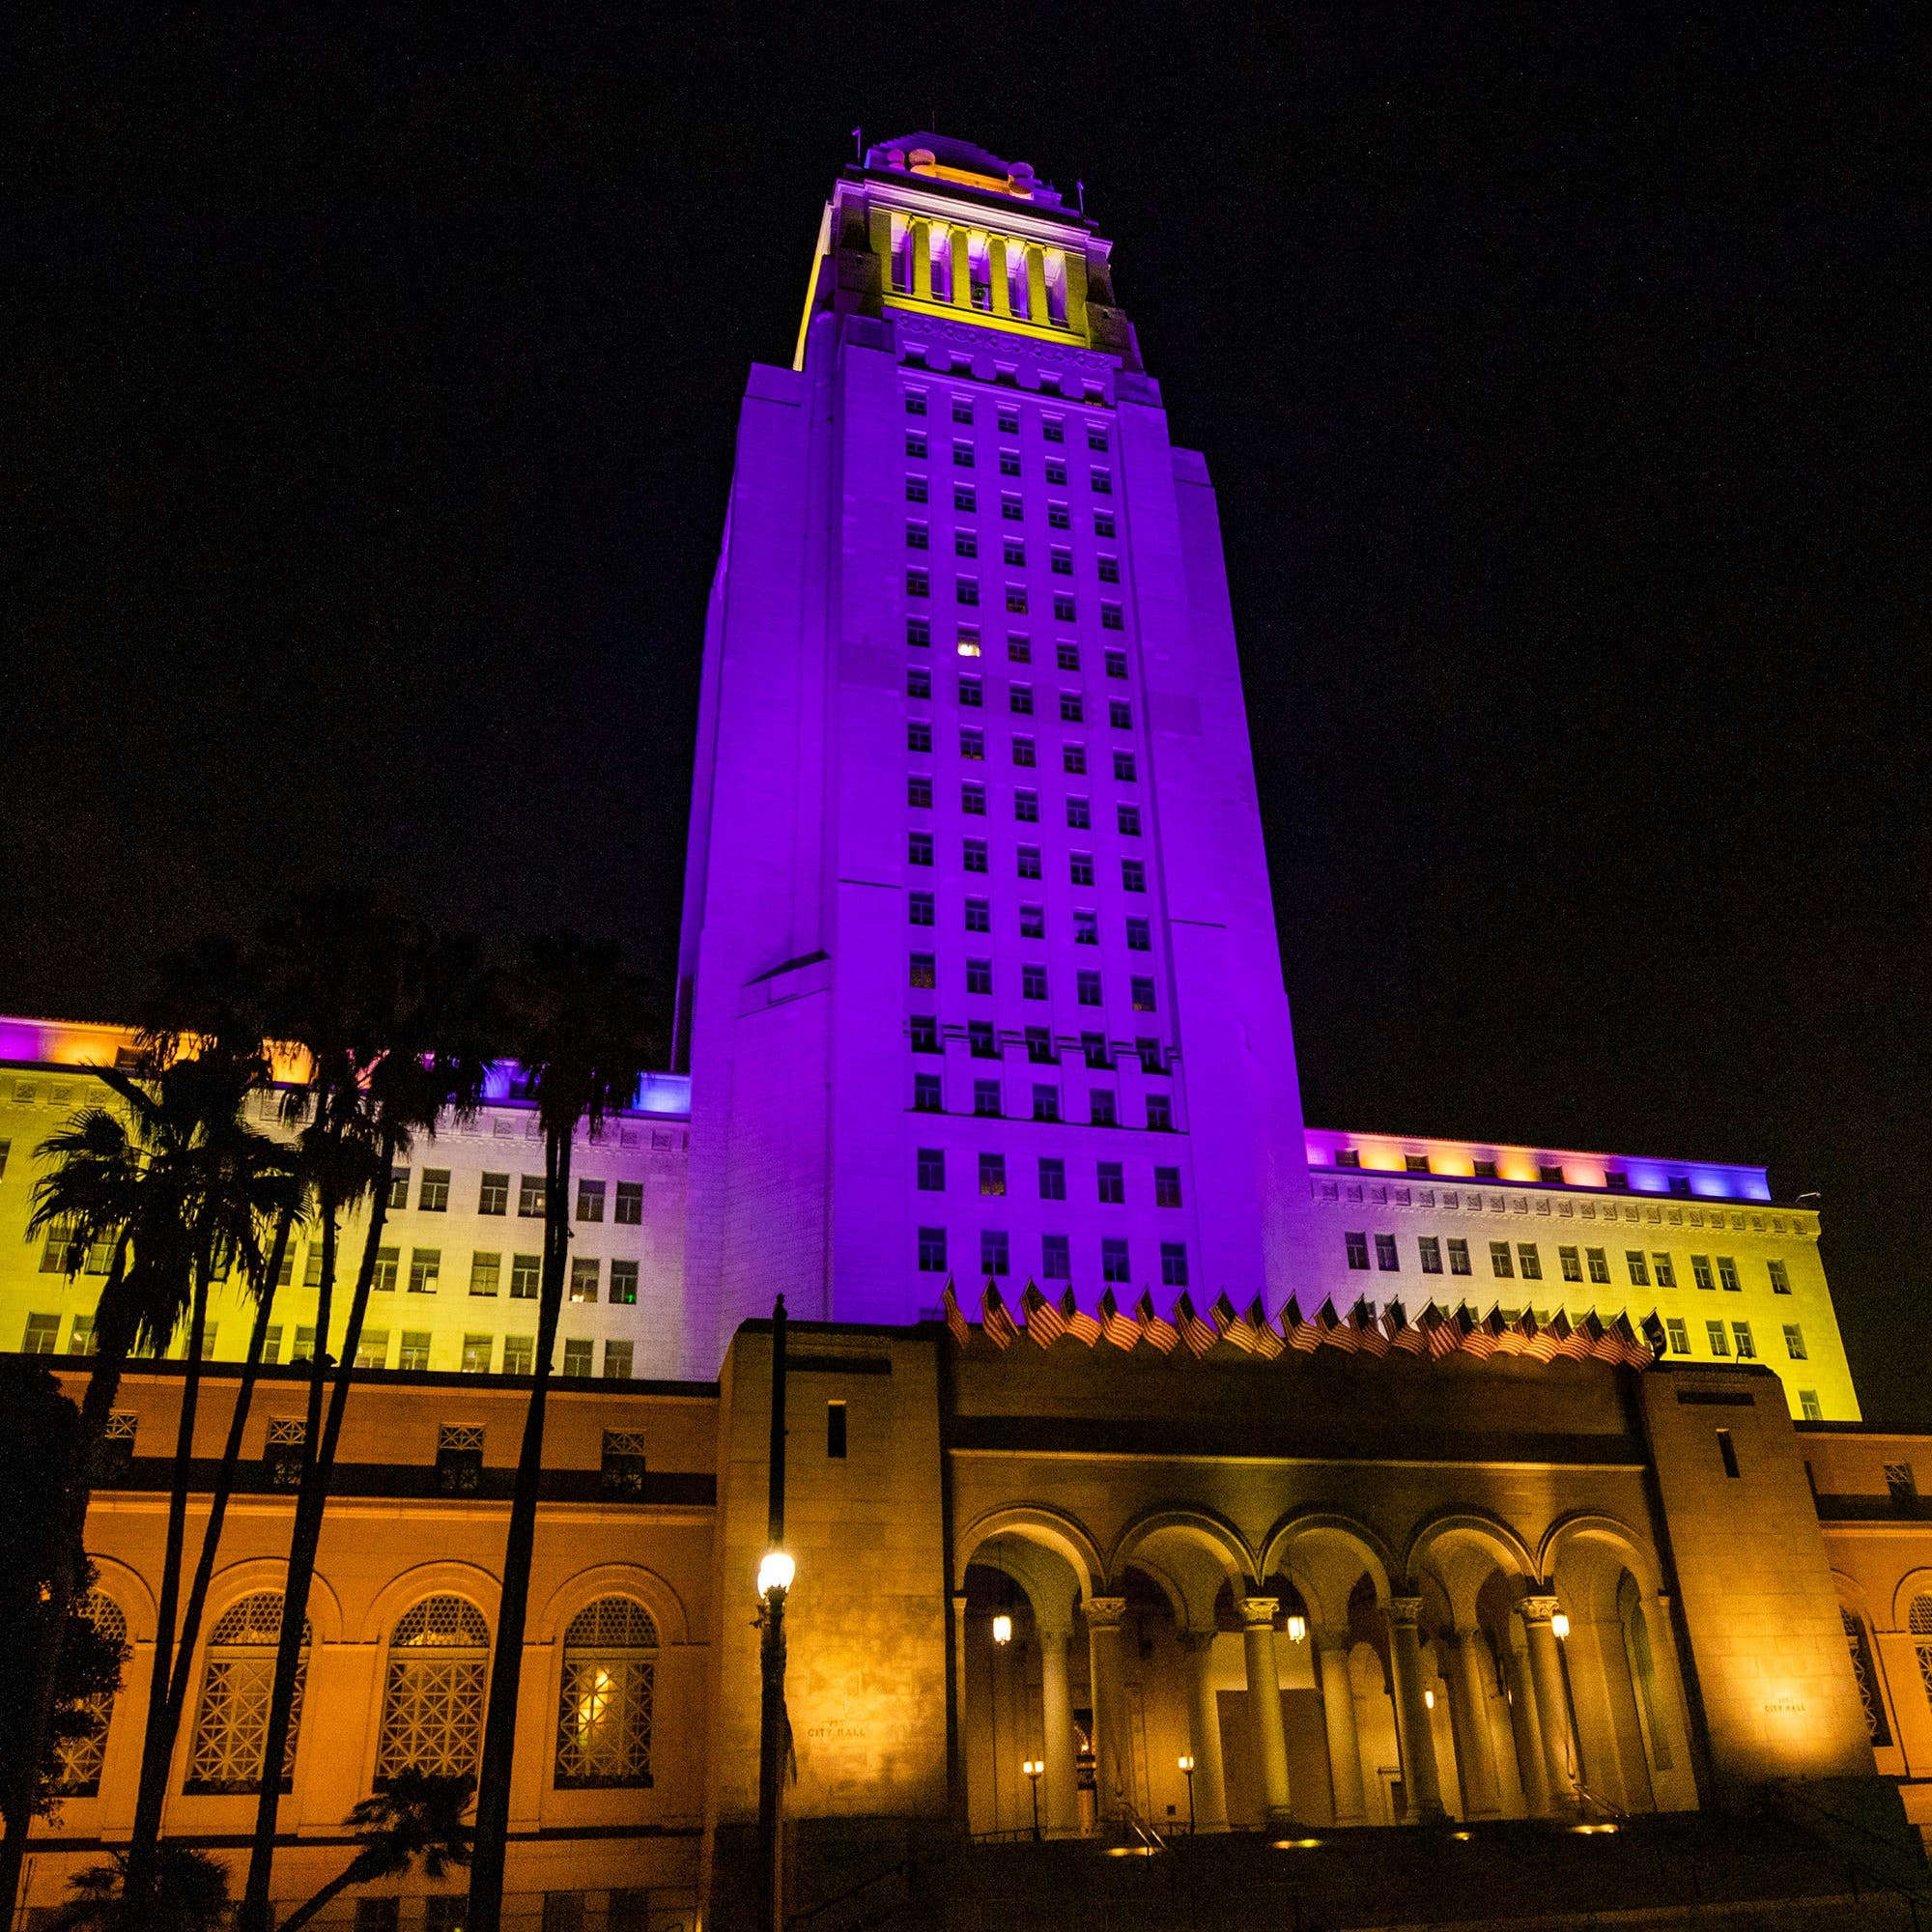 LA City Hall lit up in purple and gold in honor of Kobe Bryant